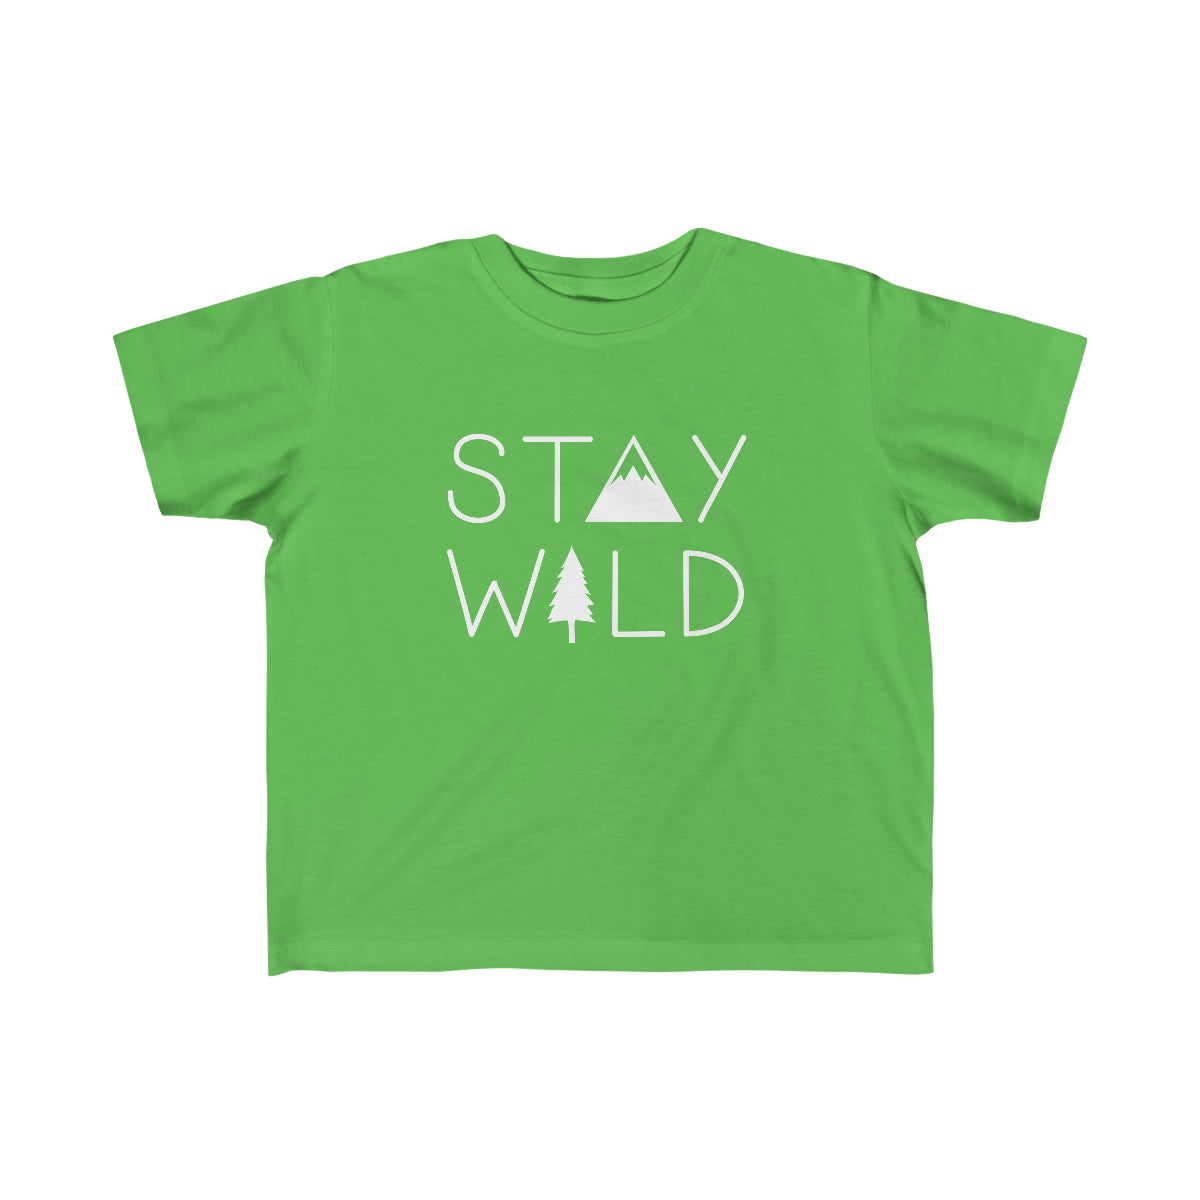 Stay Wild Toddler Tee Apple / 2T - The Northwest Store